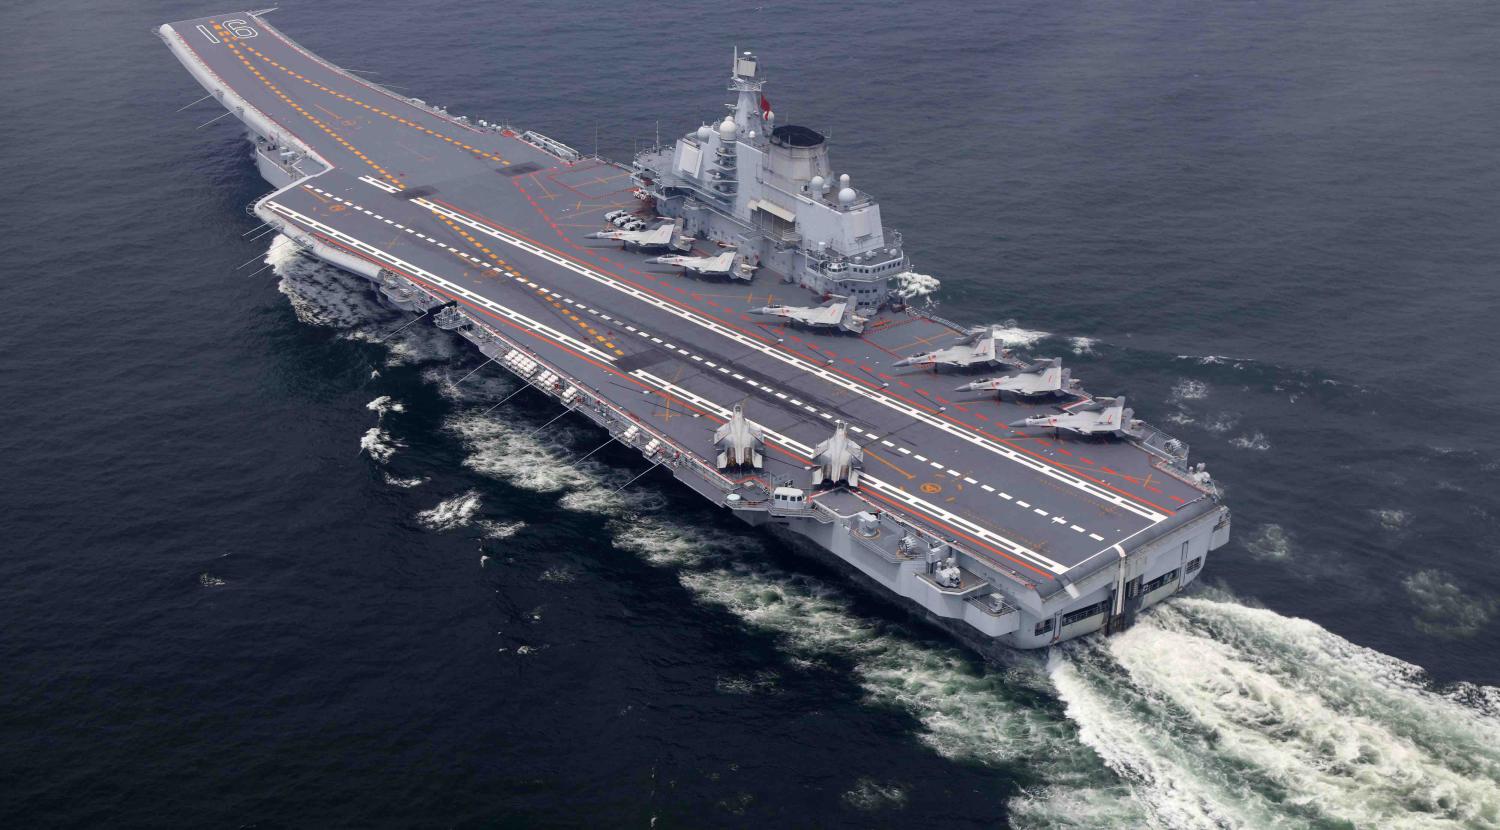 Chinese Aircraft Carrier Liaoning during a training mission in July 2017 (Photo: VCG via Getty)